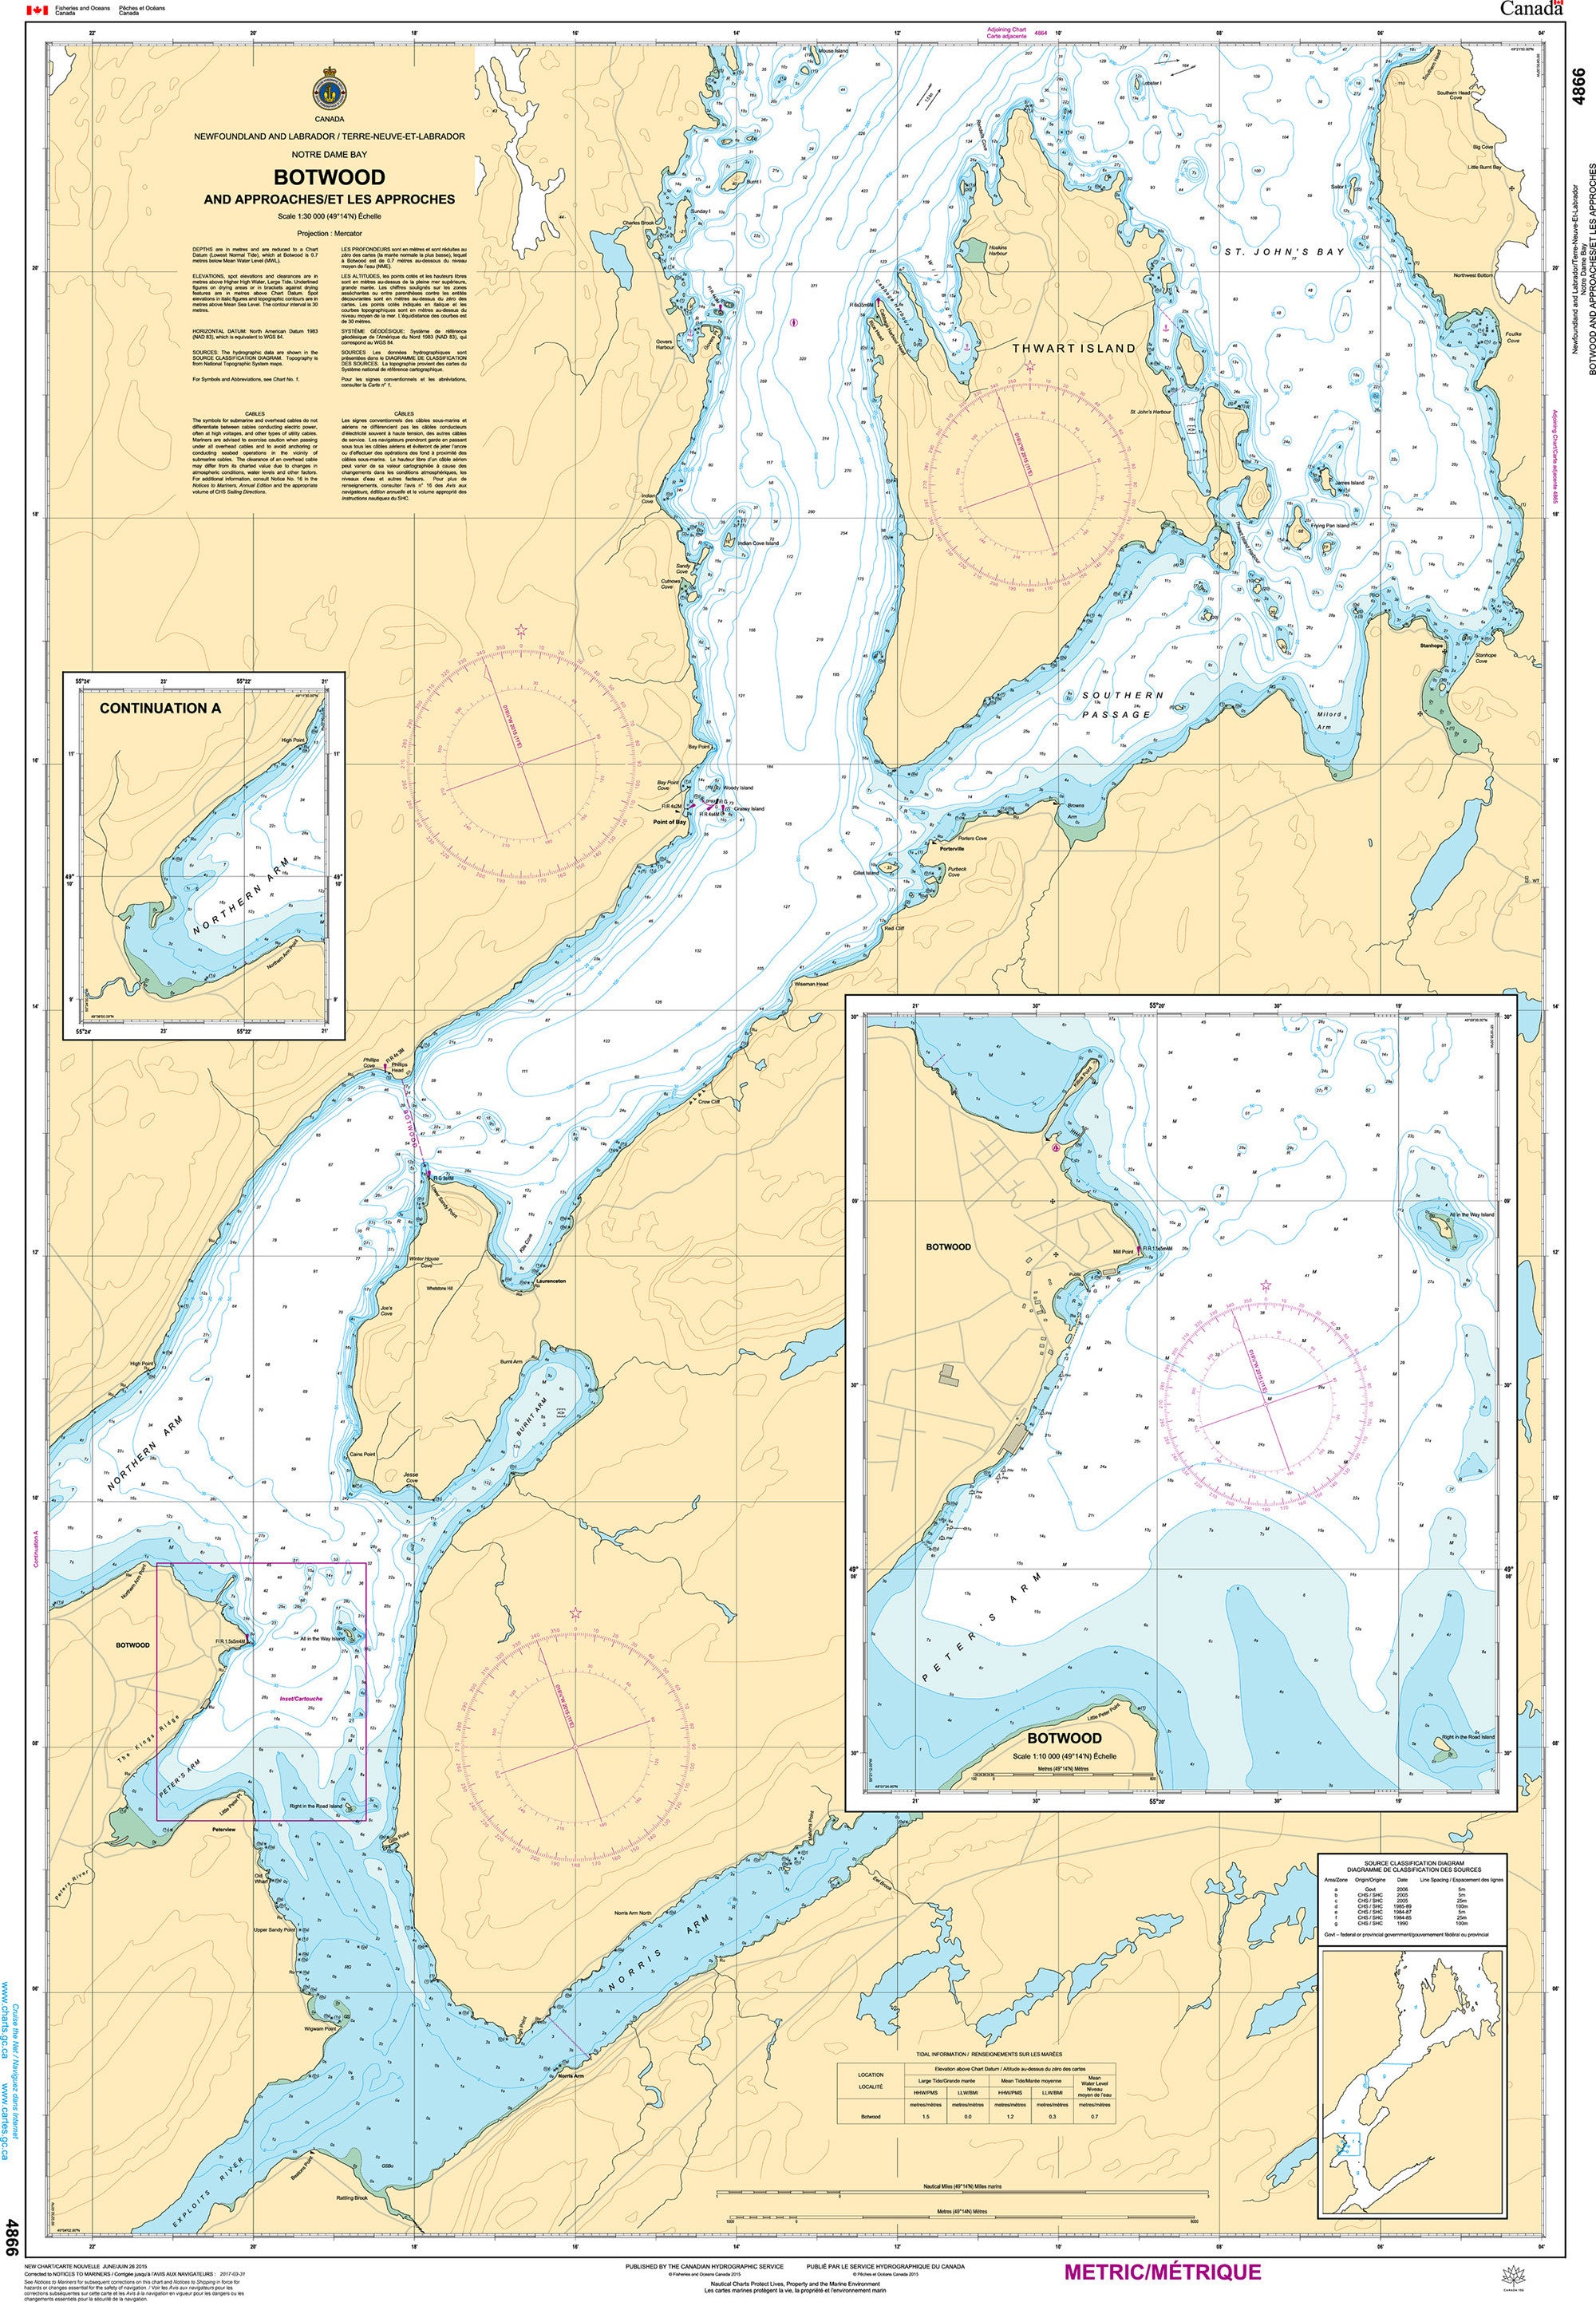 Canadian Hydrographic Service Nautical Chart CHS4866: Botwood and Approaches / et les approches